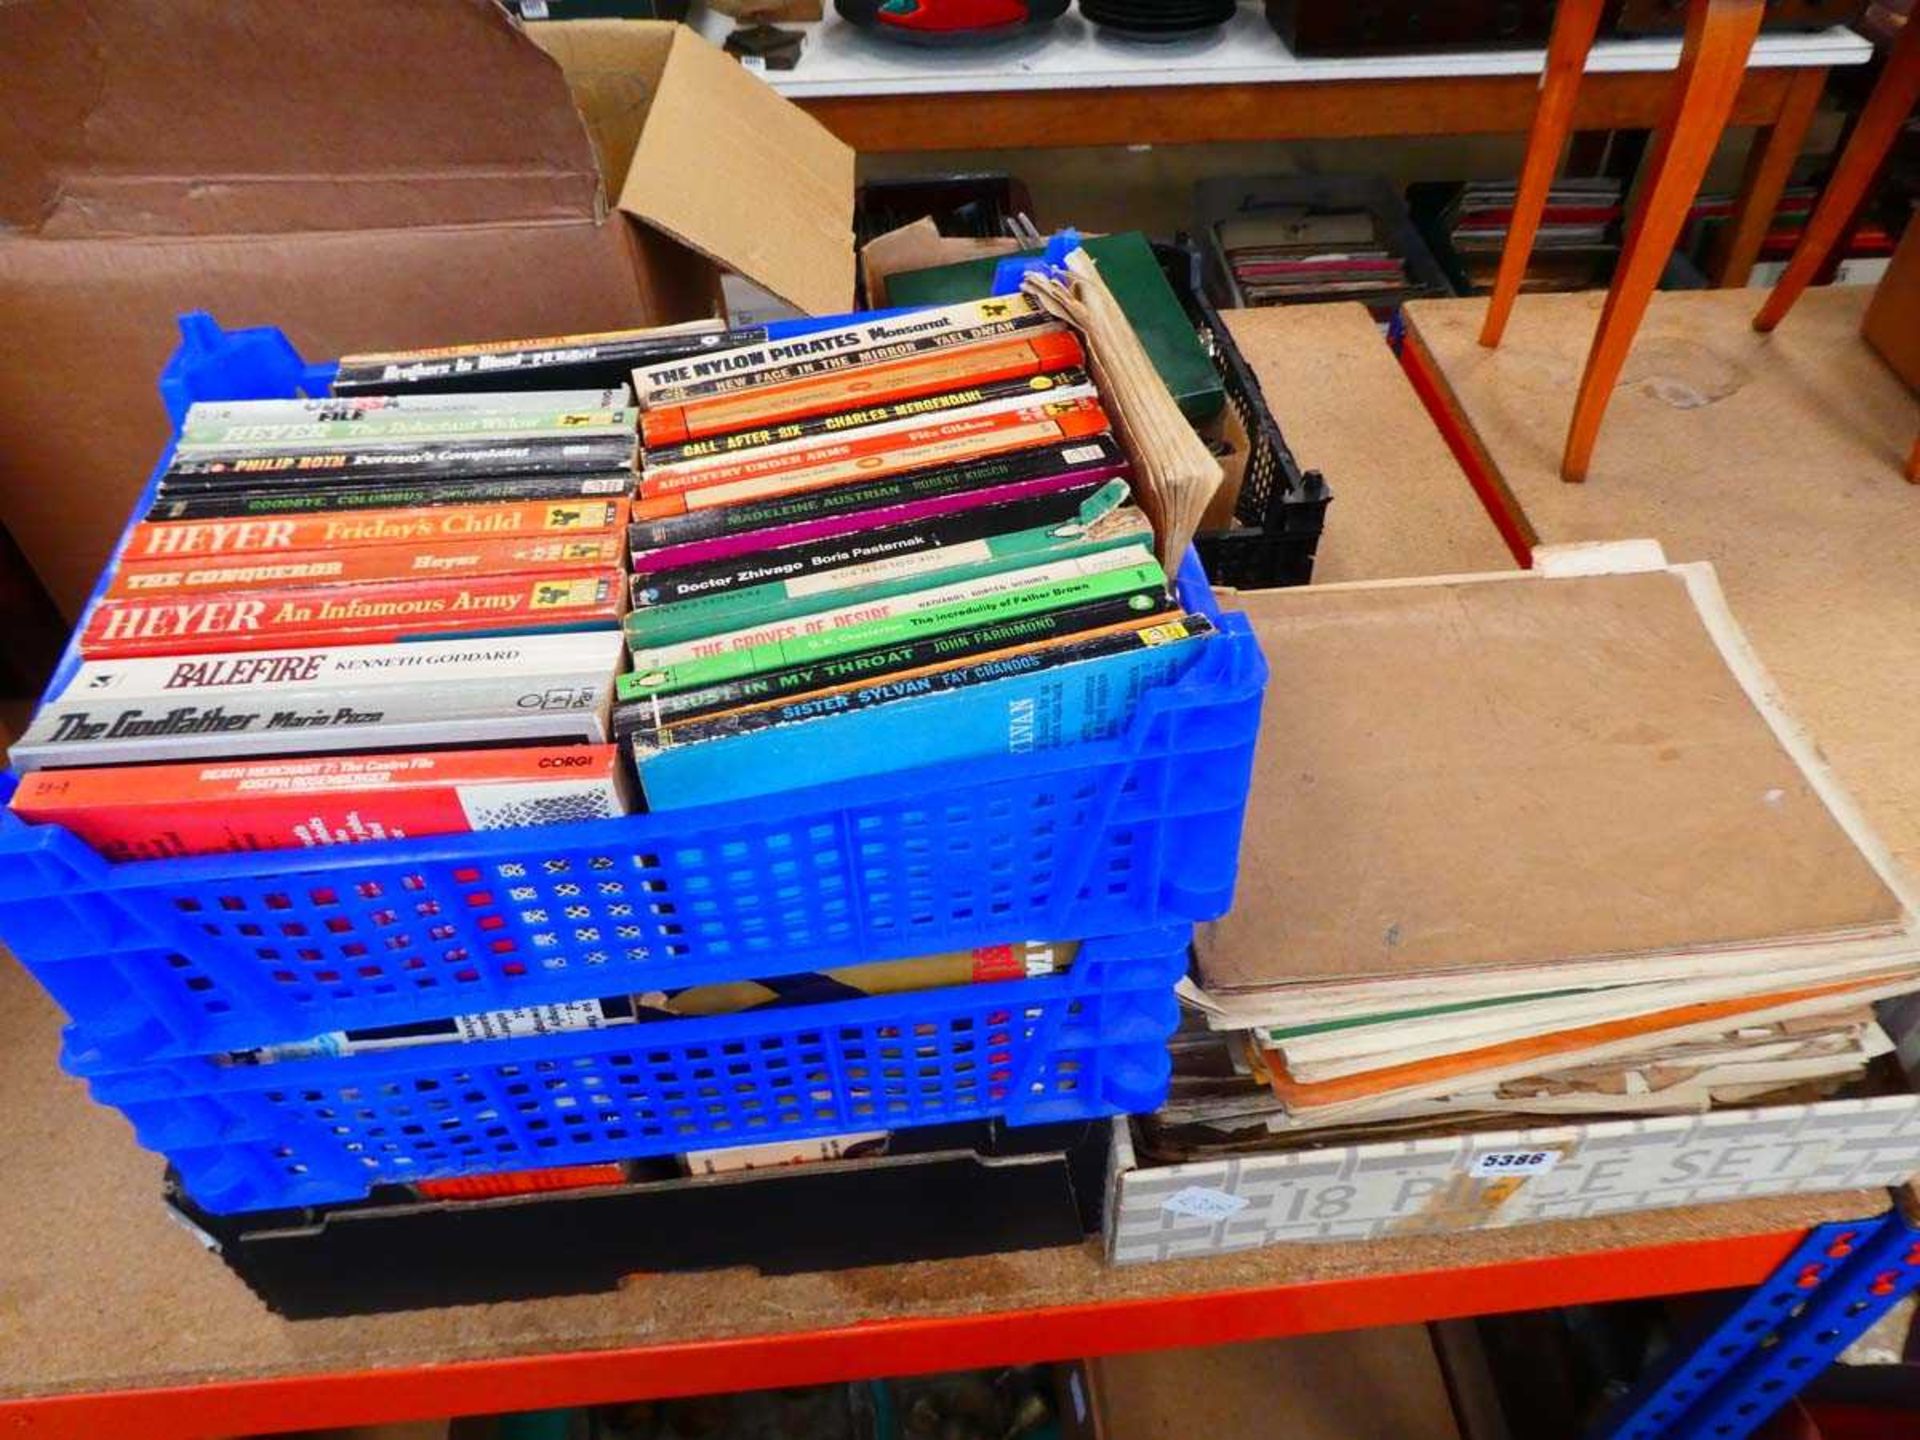 4 boxes of books, sheet music etc